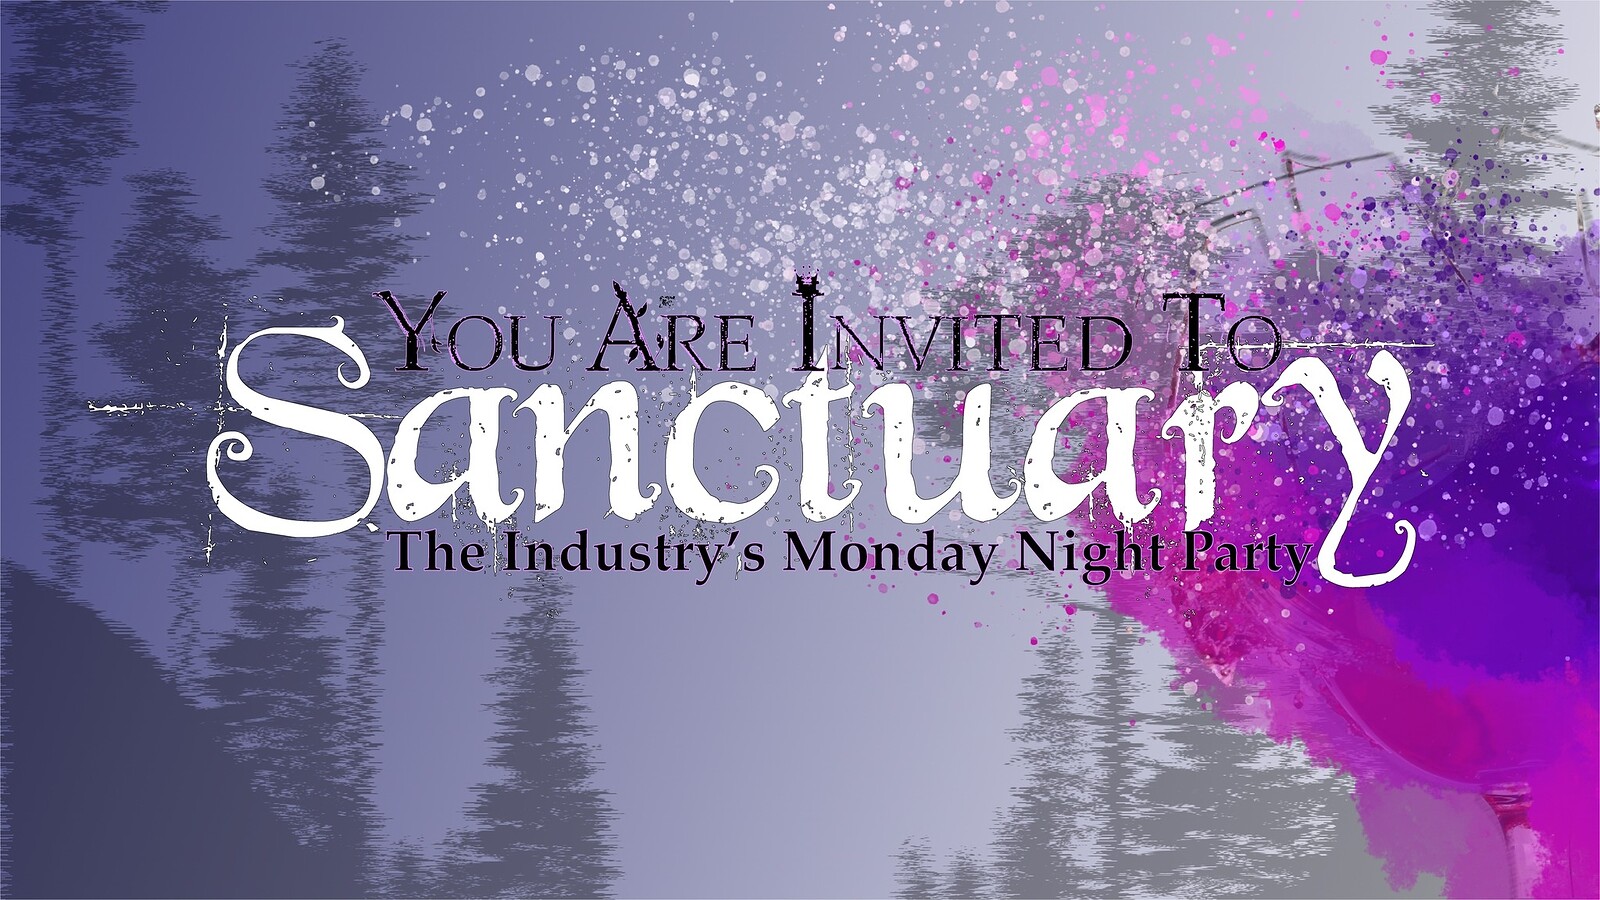 Sanctuary - The Industry's Monday Night Party at Beard and Sabre